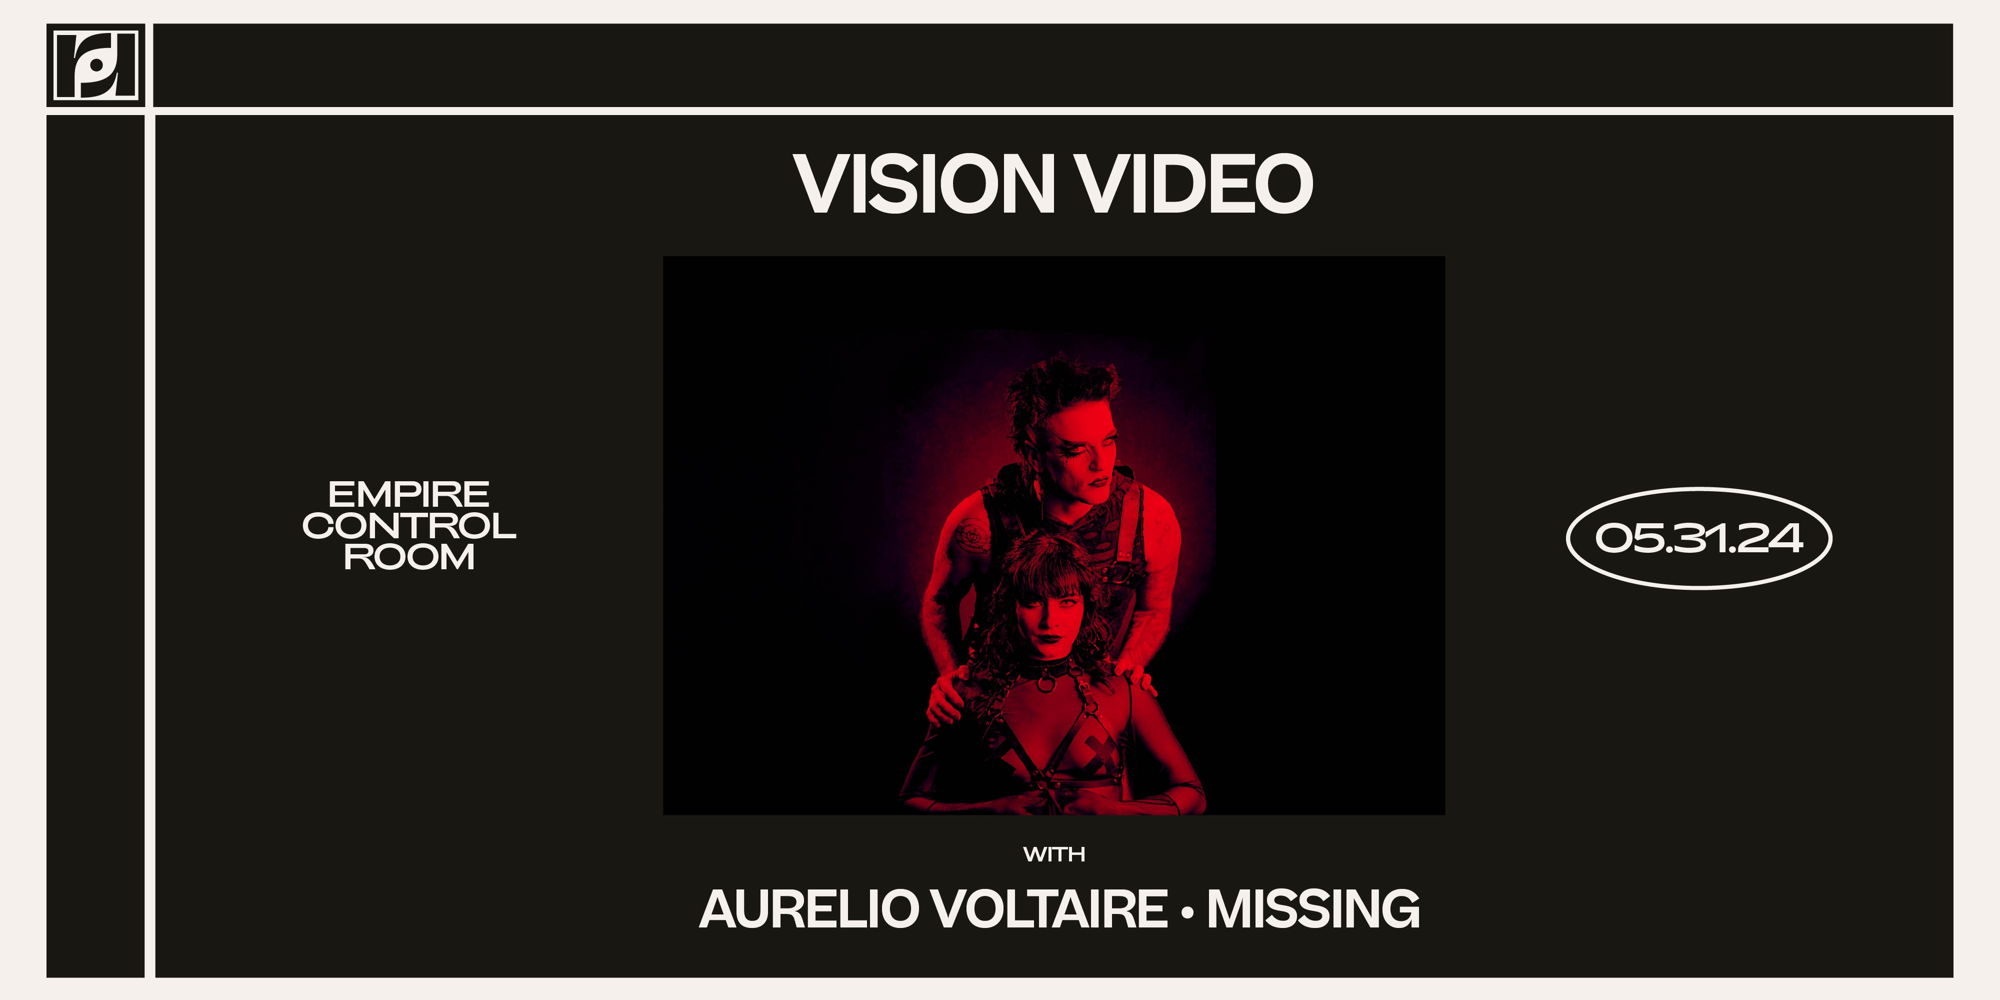 Resound Presents: Vision Video w/ Aurelio Voltaire and Missing at Empire Control Room promotional image